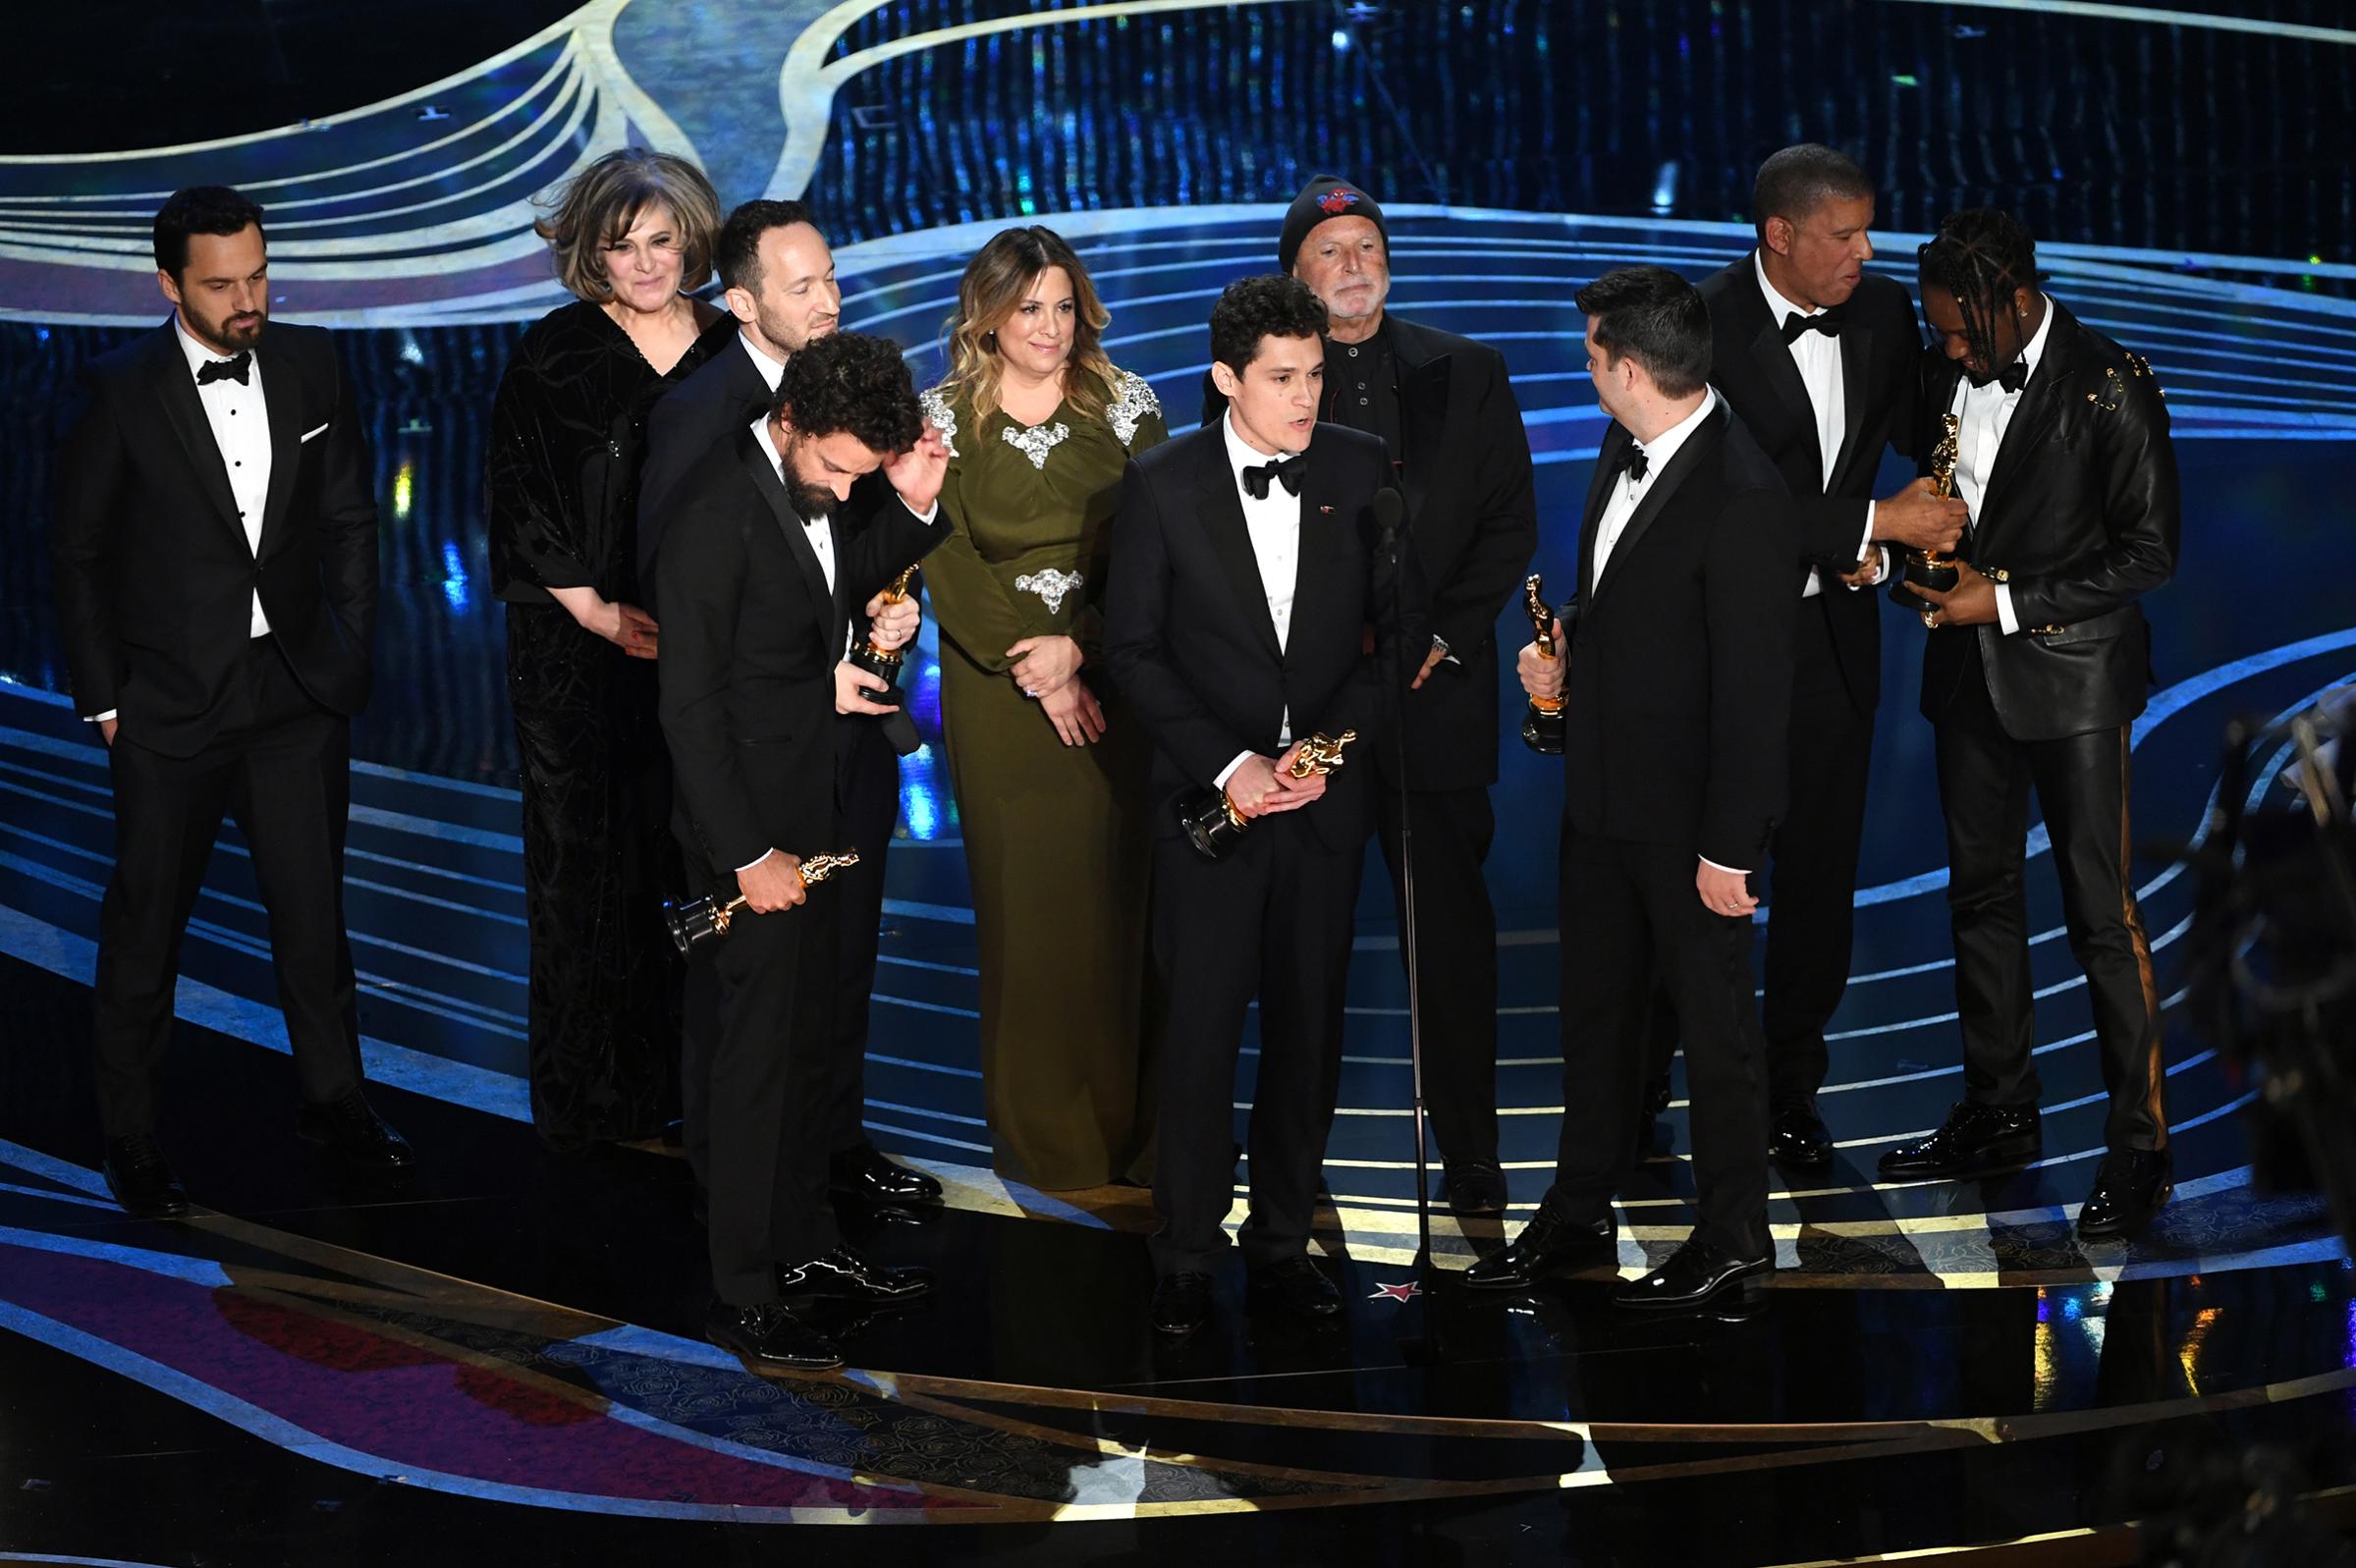 Crew of 'Spider-Man: Into the Spider-Verse' accept the Animated Feature Film award onstage during the 91st Annual Academy Awards at Dolby Theatre on Feb. 24, 2019.